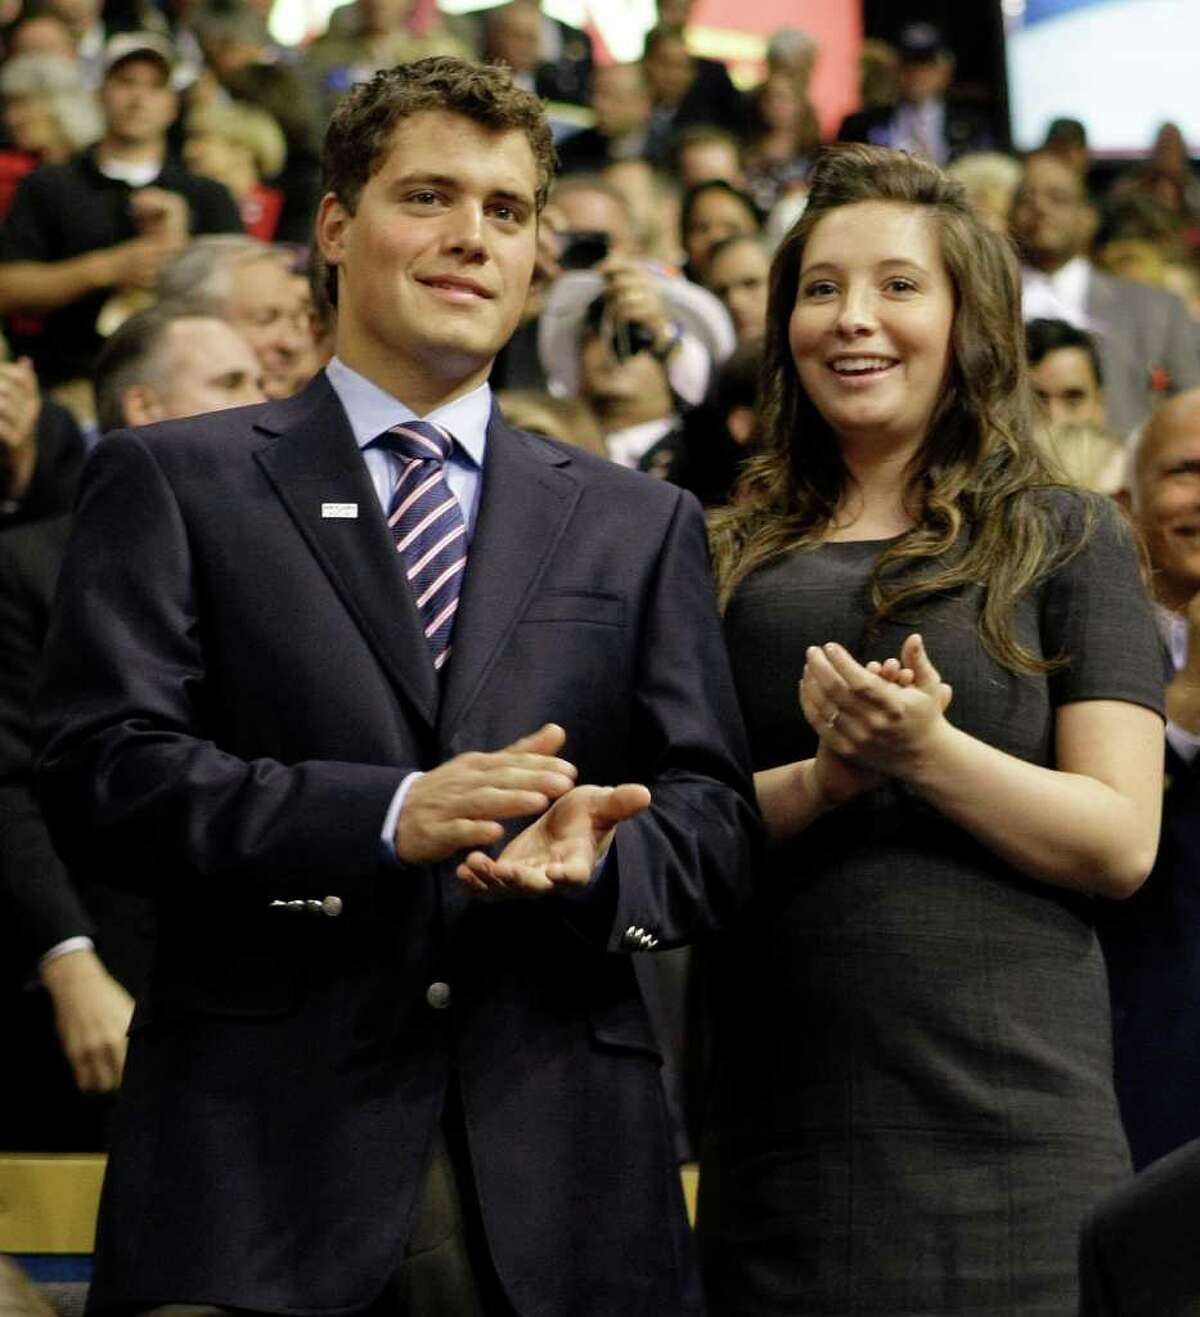 **FILE** This Sept. 3, 2008 file photo shows Bristol Palin, daughter of Alaska Gov. Sarah Palin, and her boyfriend Levi Johnston at the Republican National Convention in St. Paul, Minn. The engagement is off for Bristol Palin and Levi Johnston, the father of her baby. Johnston told The Associated Press on Wednesday, March 11, 2009 that he and Bristol Palin mutually decided "a while ago" to end their relationship. (AP Photo/Charles Rex Arbogast, file)